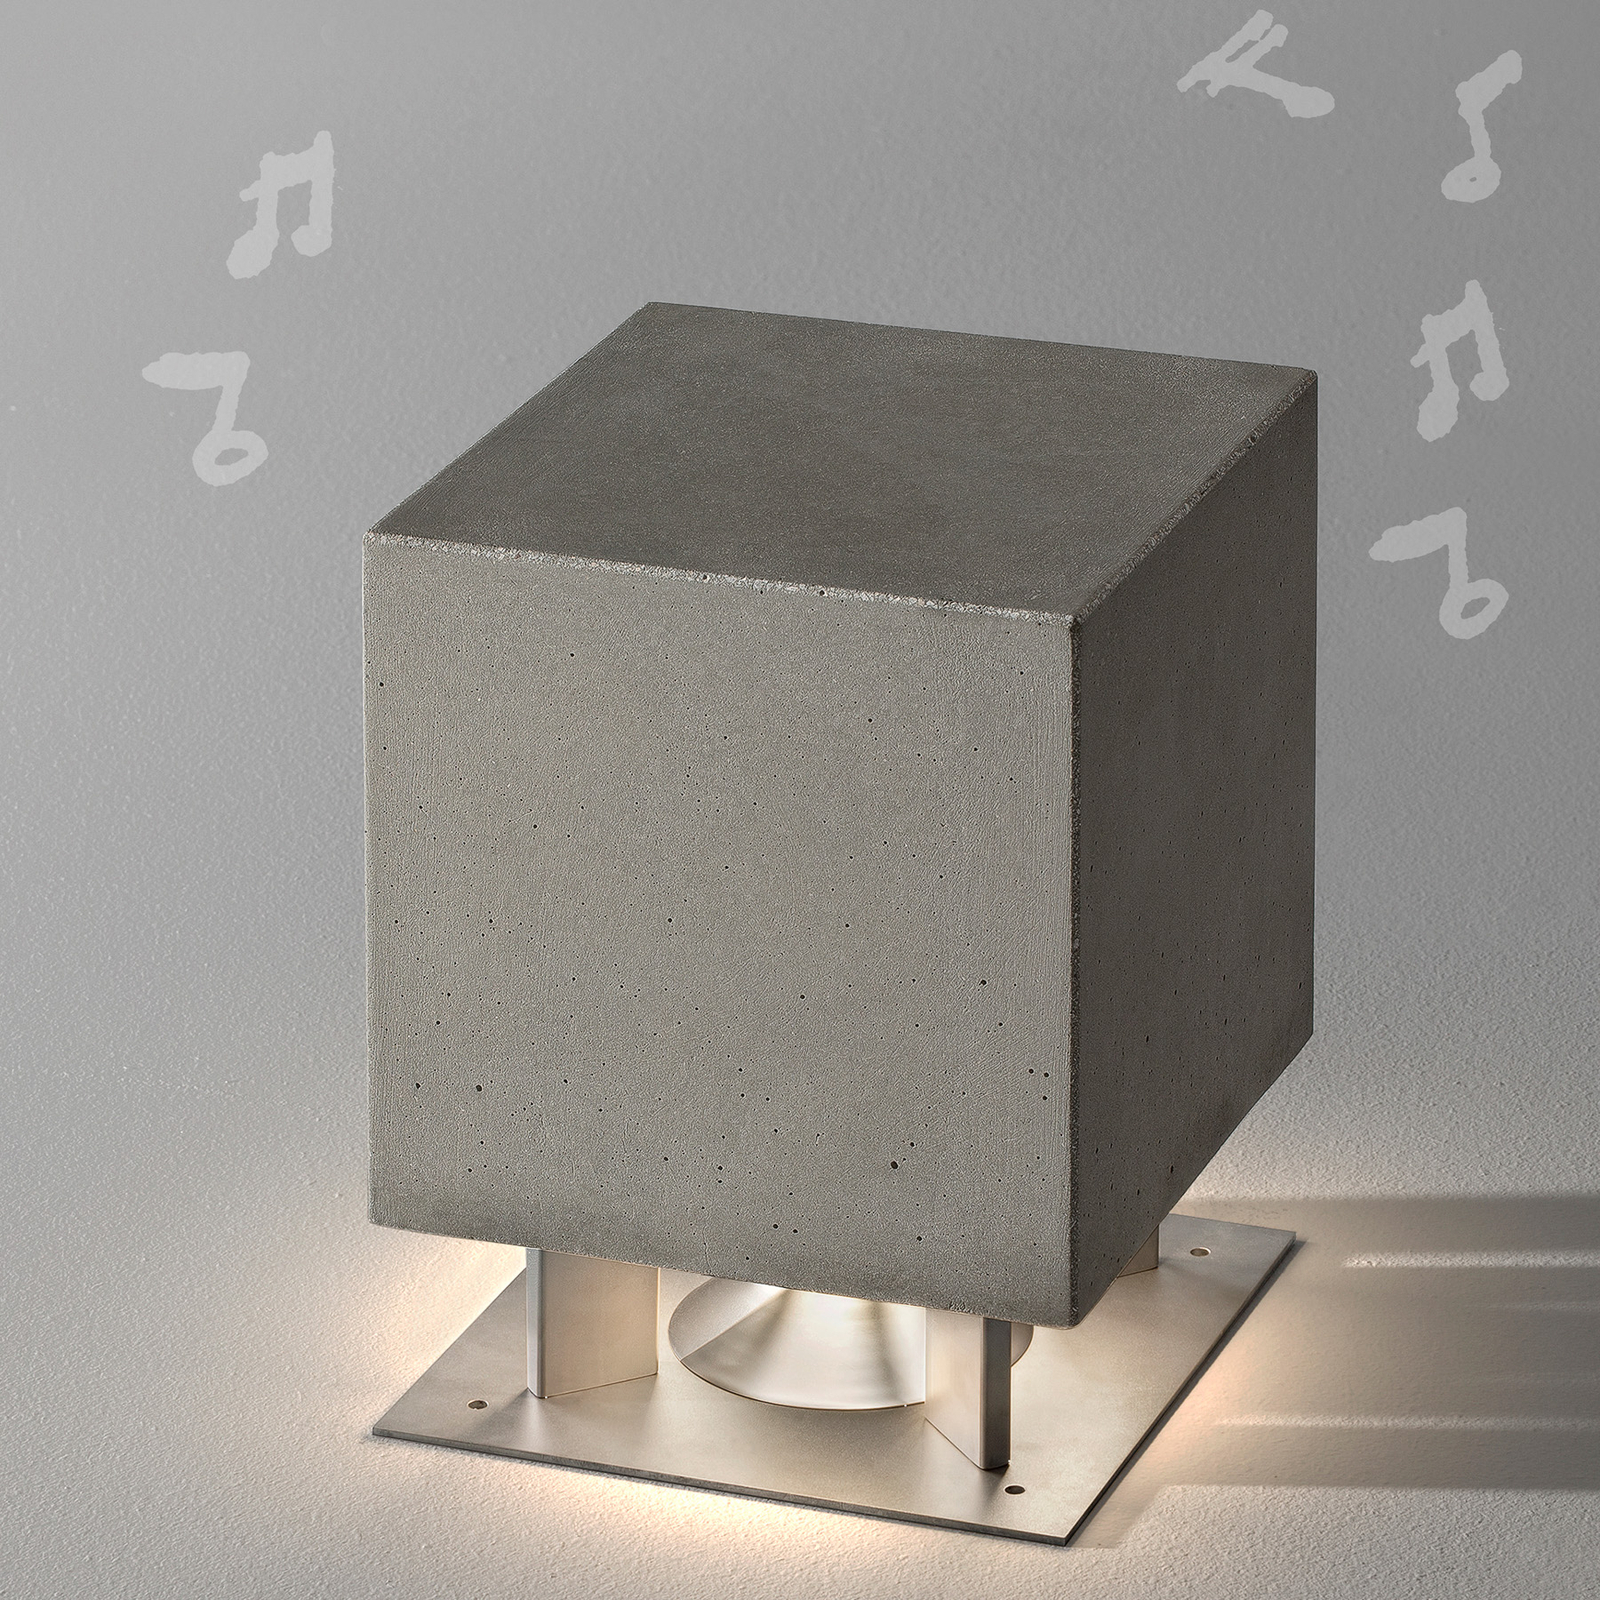 OLEV Cemento LED pillar light with a speaker